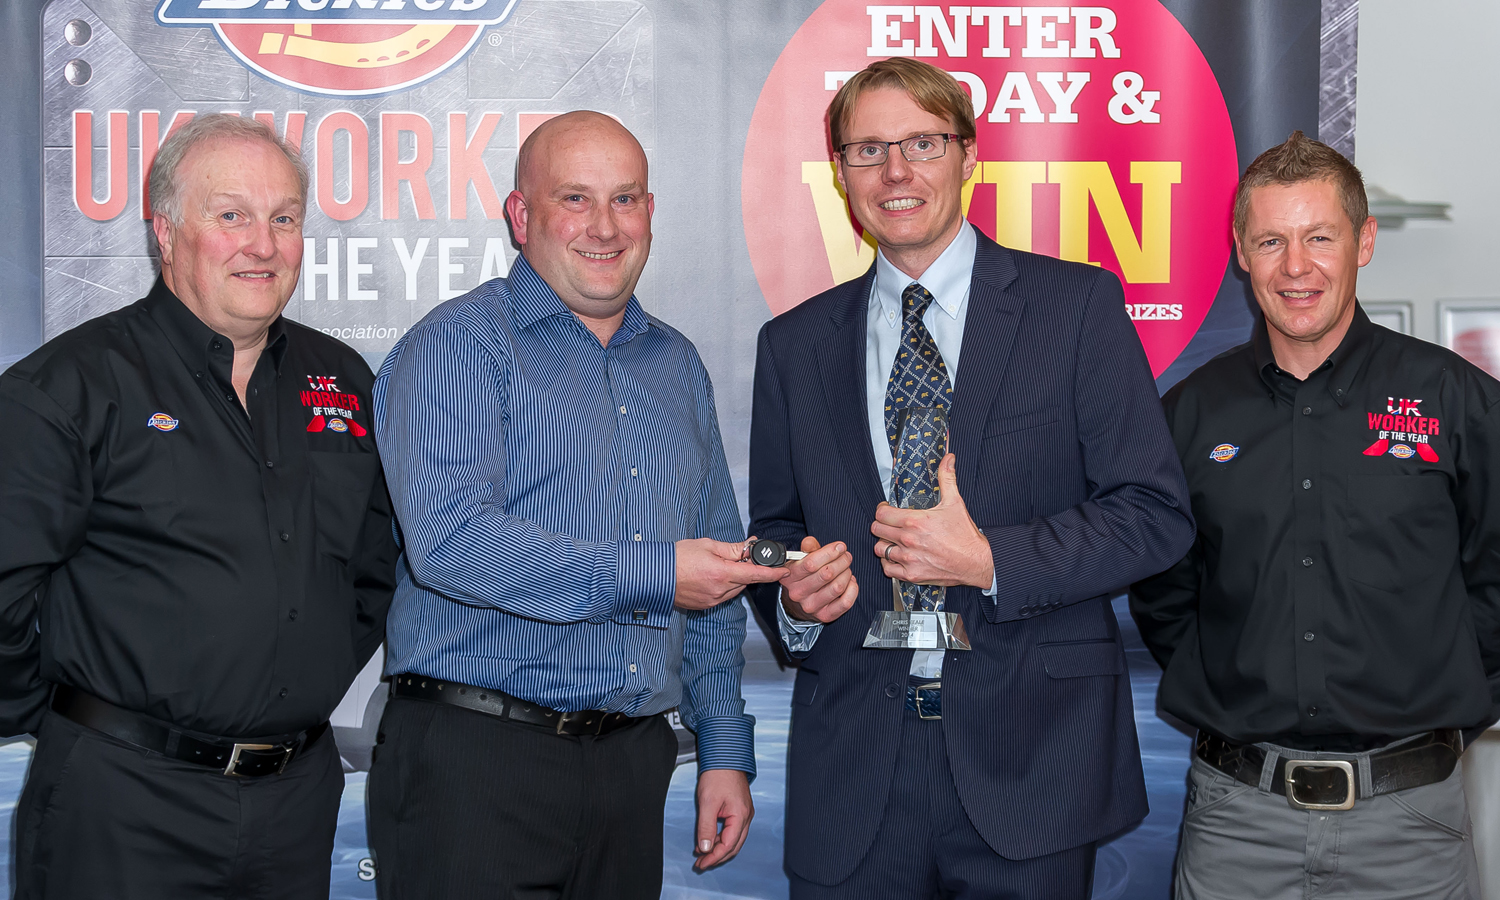 Plumber wins UK Worker of the Year